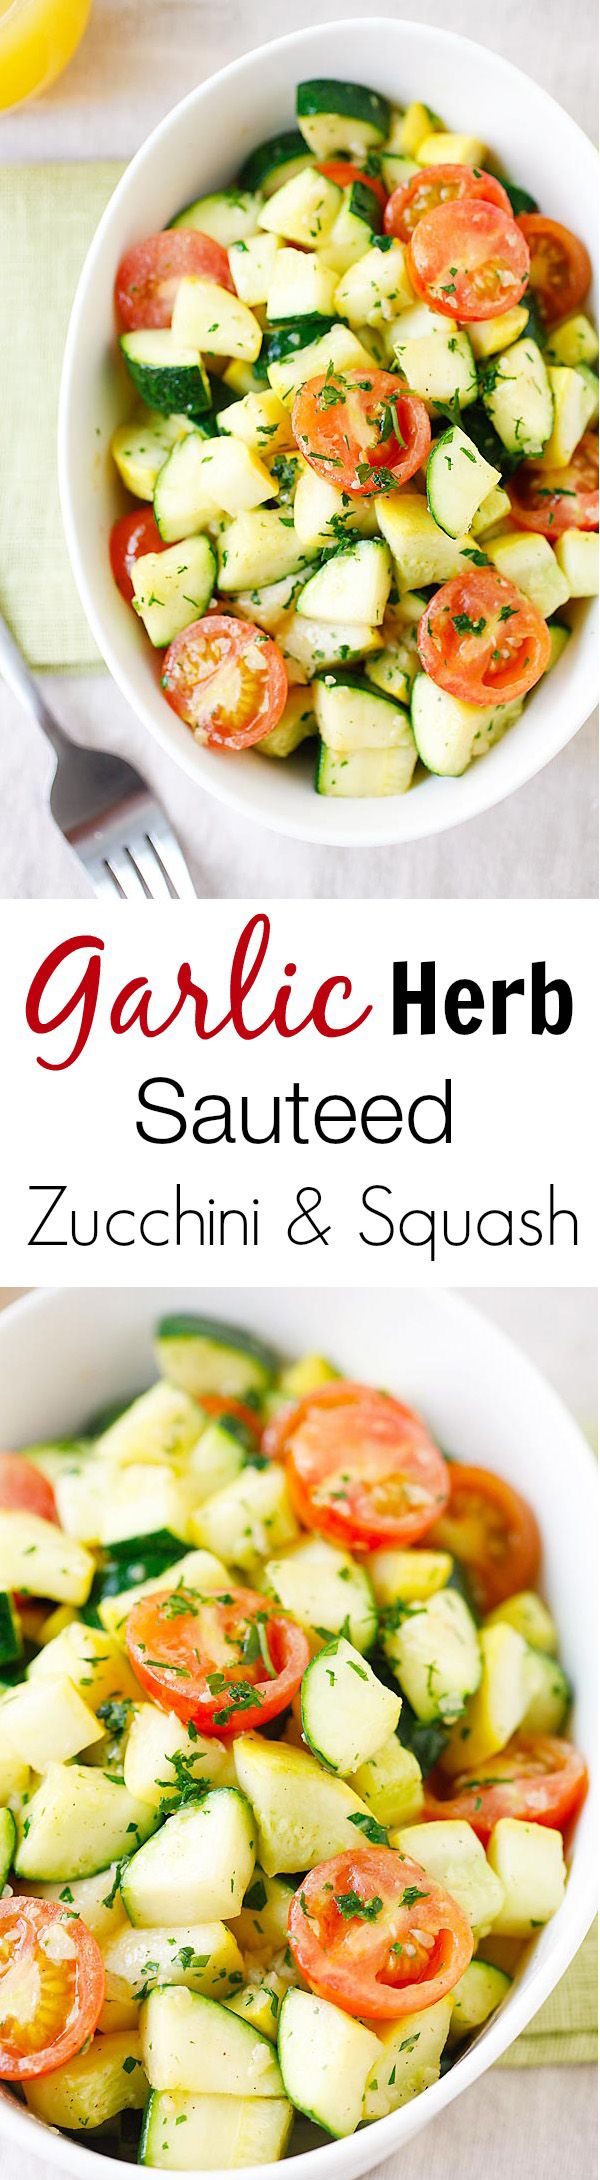 Garlic Herb Sauteed Zucchini and Squash - the healthiest and freshest side dish EVER with zucchini and squash, sauteed with garlic herb butter | rasamalaysia.com